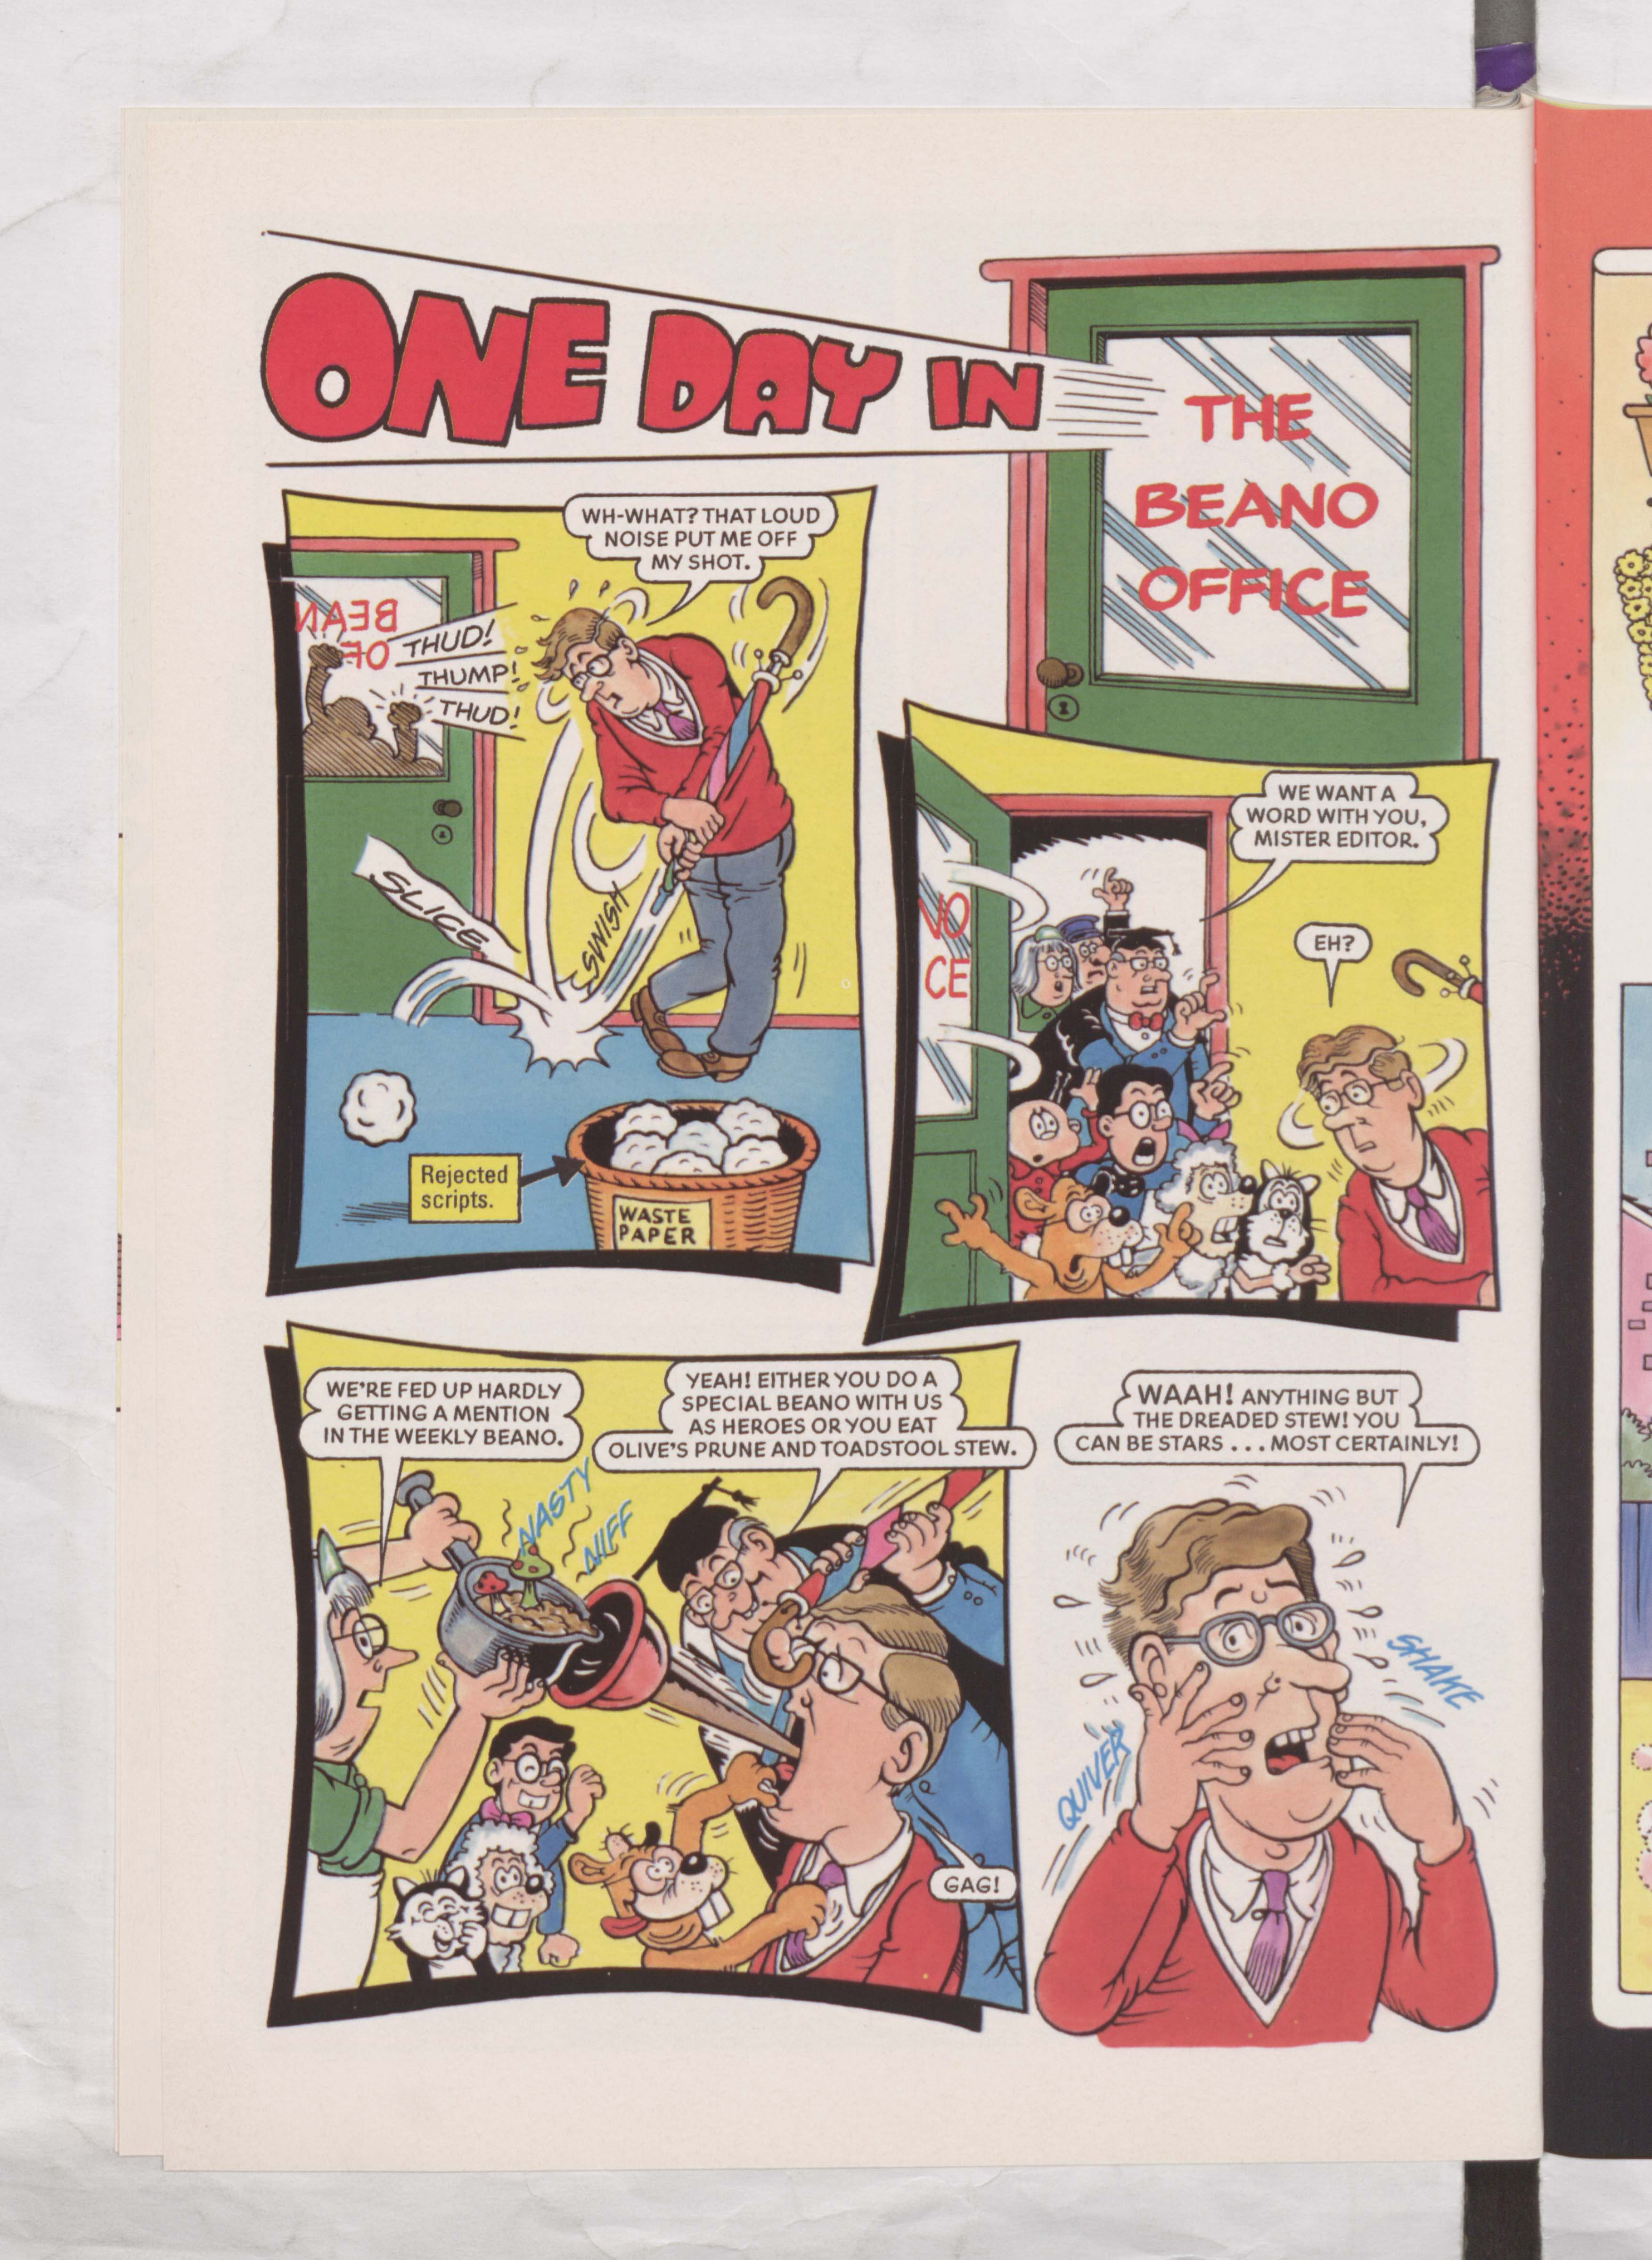 One Day in the Beano Office... - Beano Book 2002 Annual